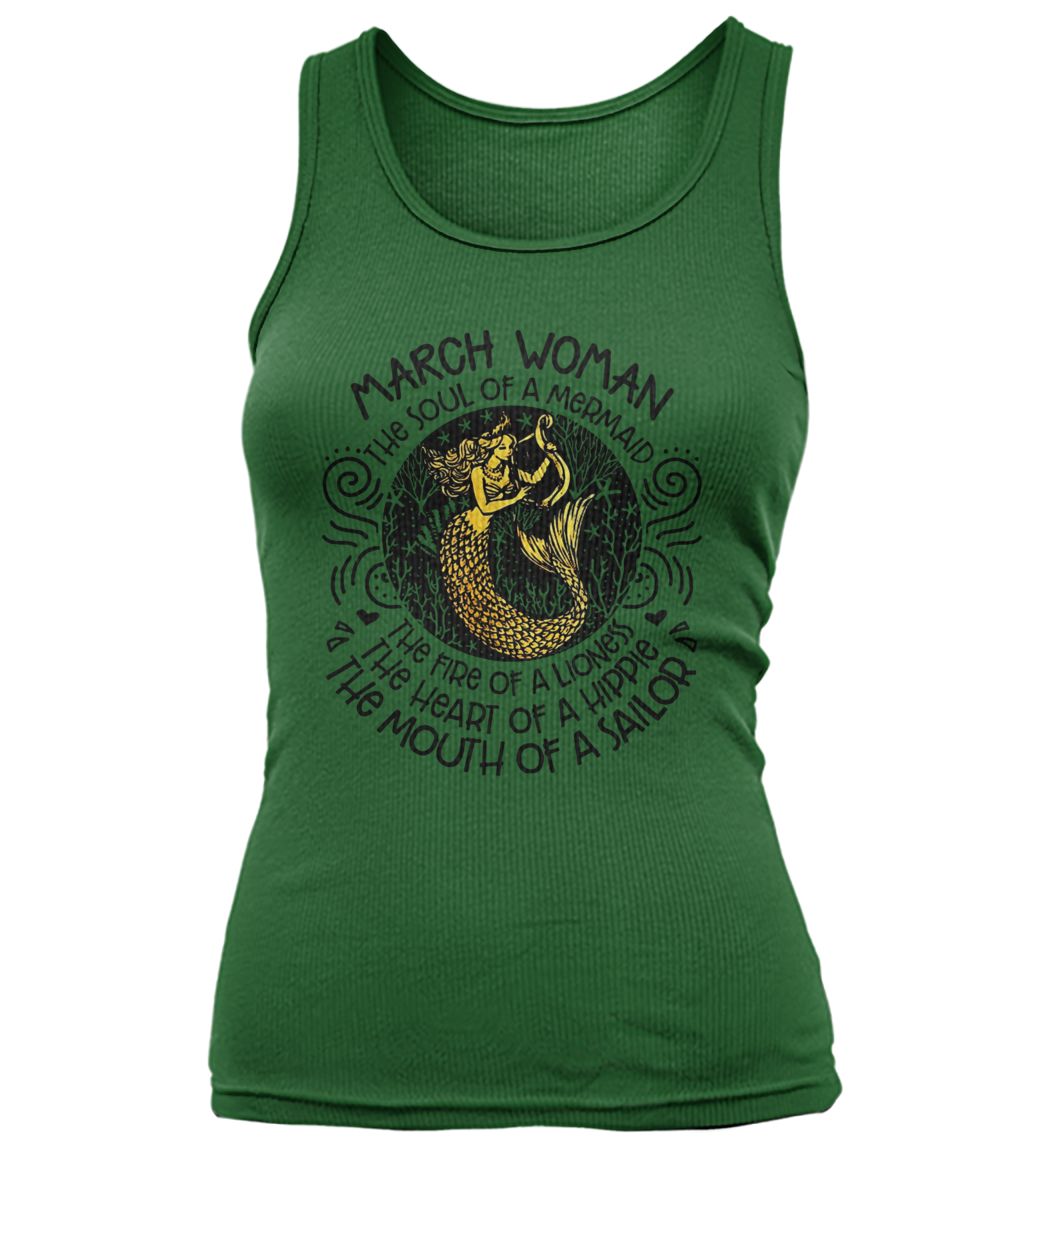 March girl the soul of a mermaid the fire of a lioness women's tank top